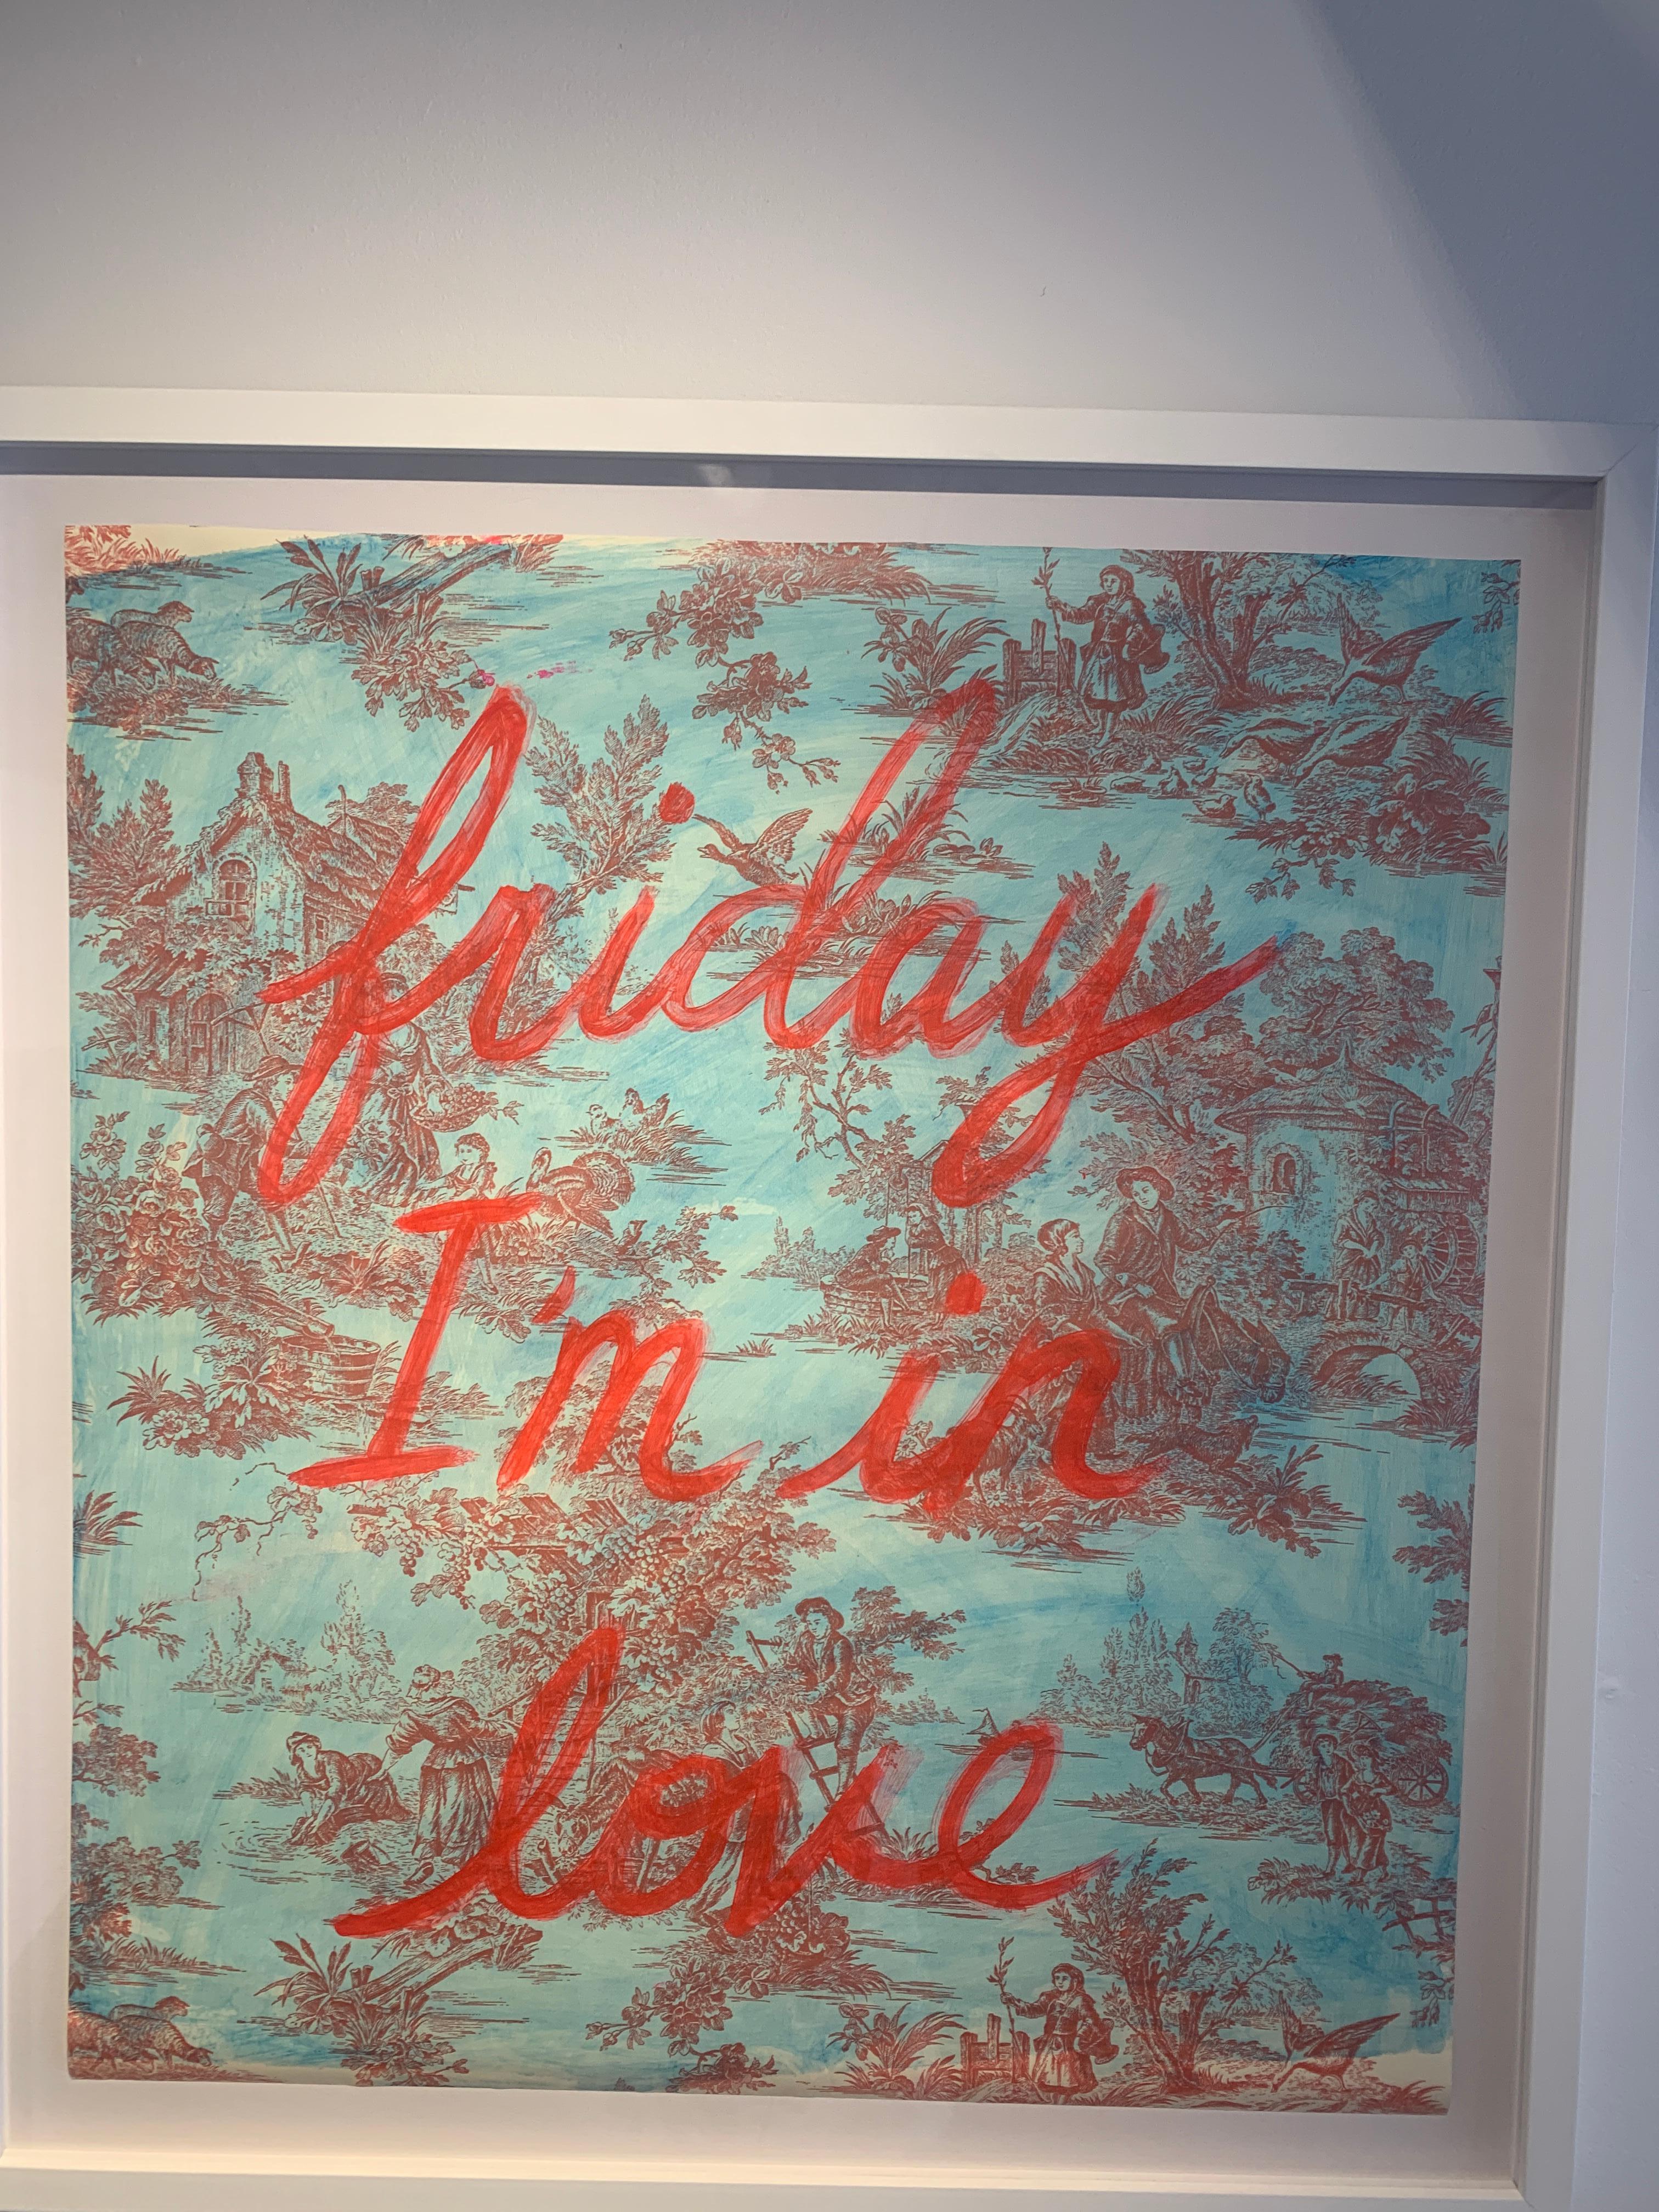 Friday I'm In Love (red) - Contemporary Art by Ayse Wilson